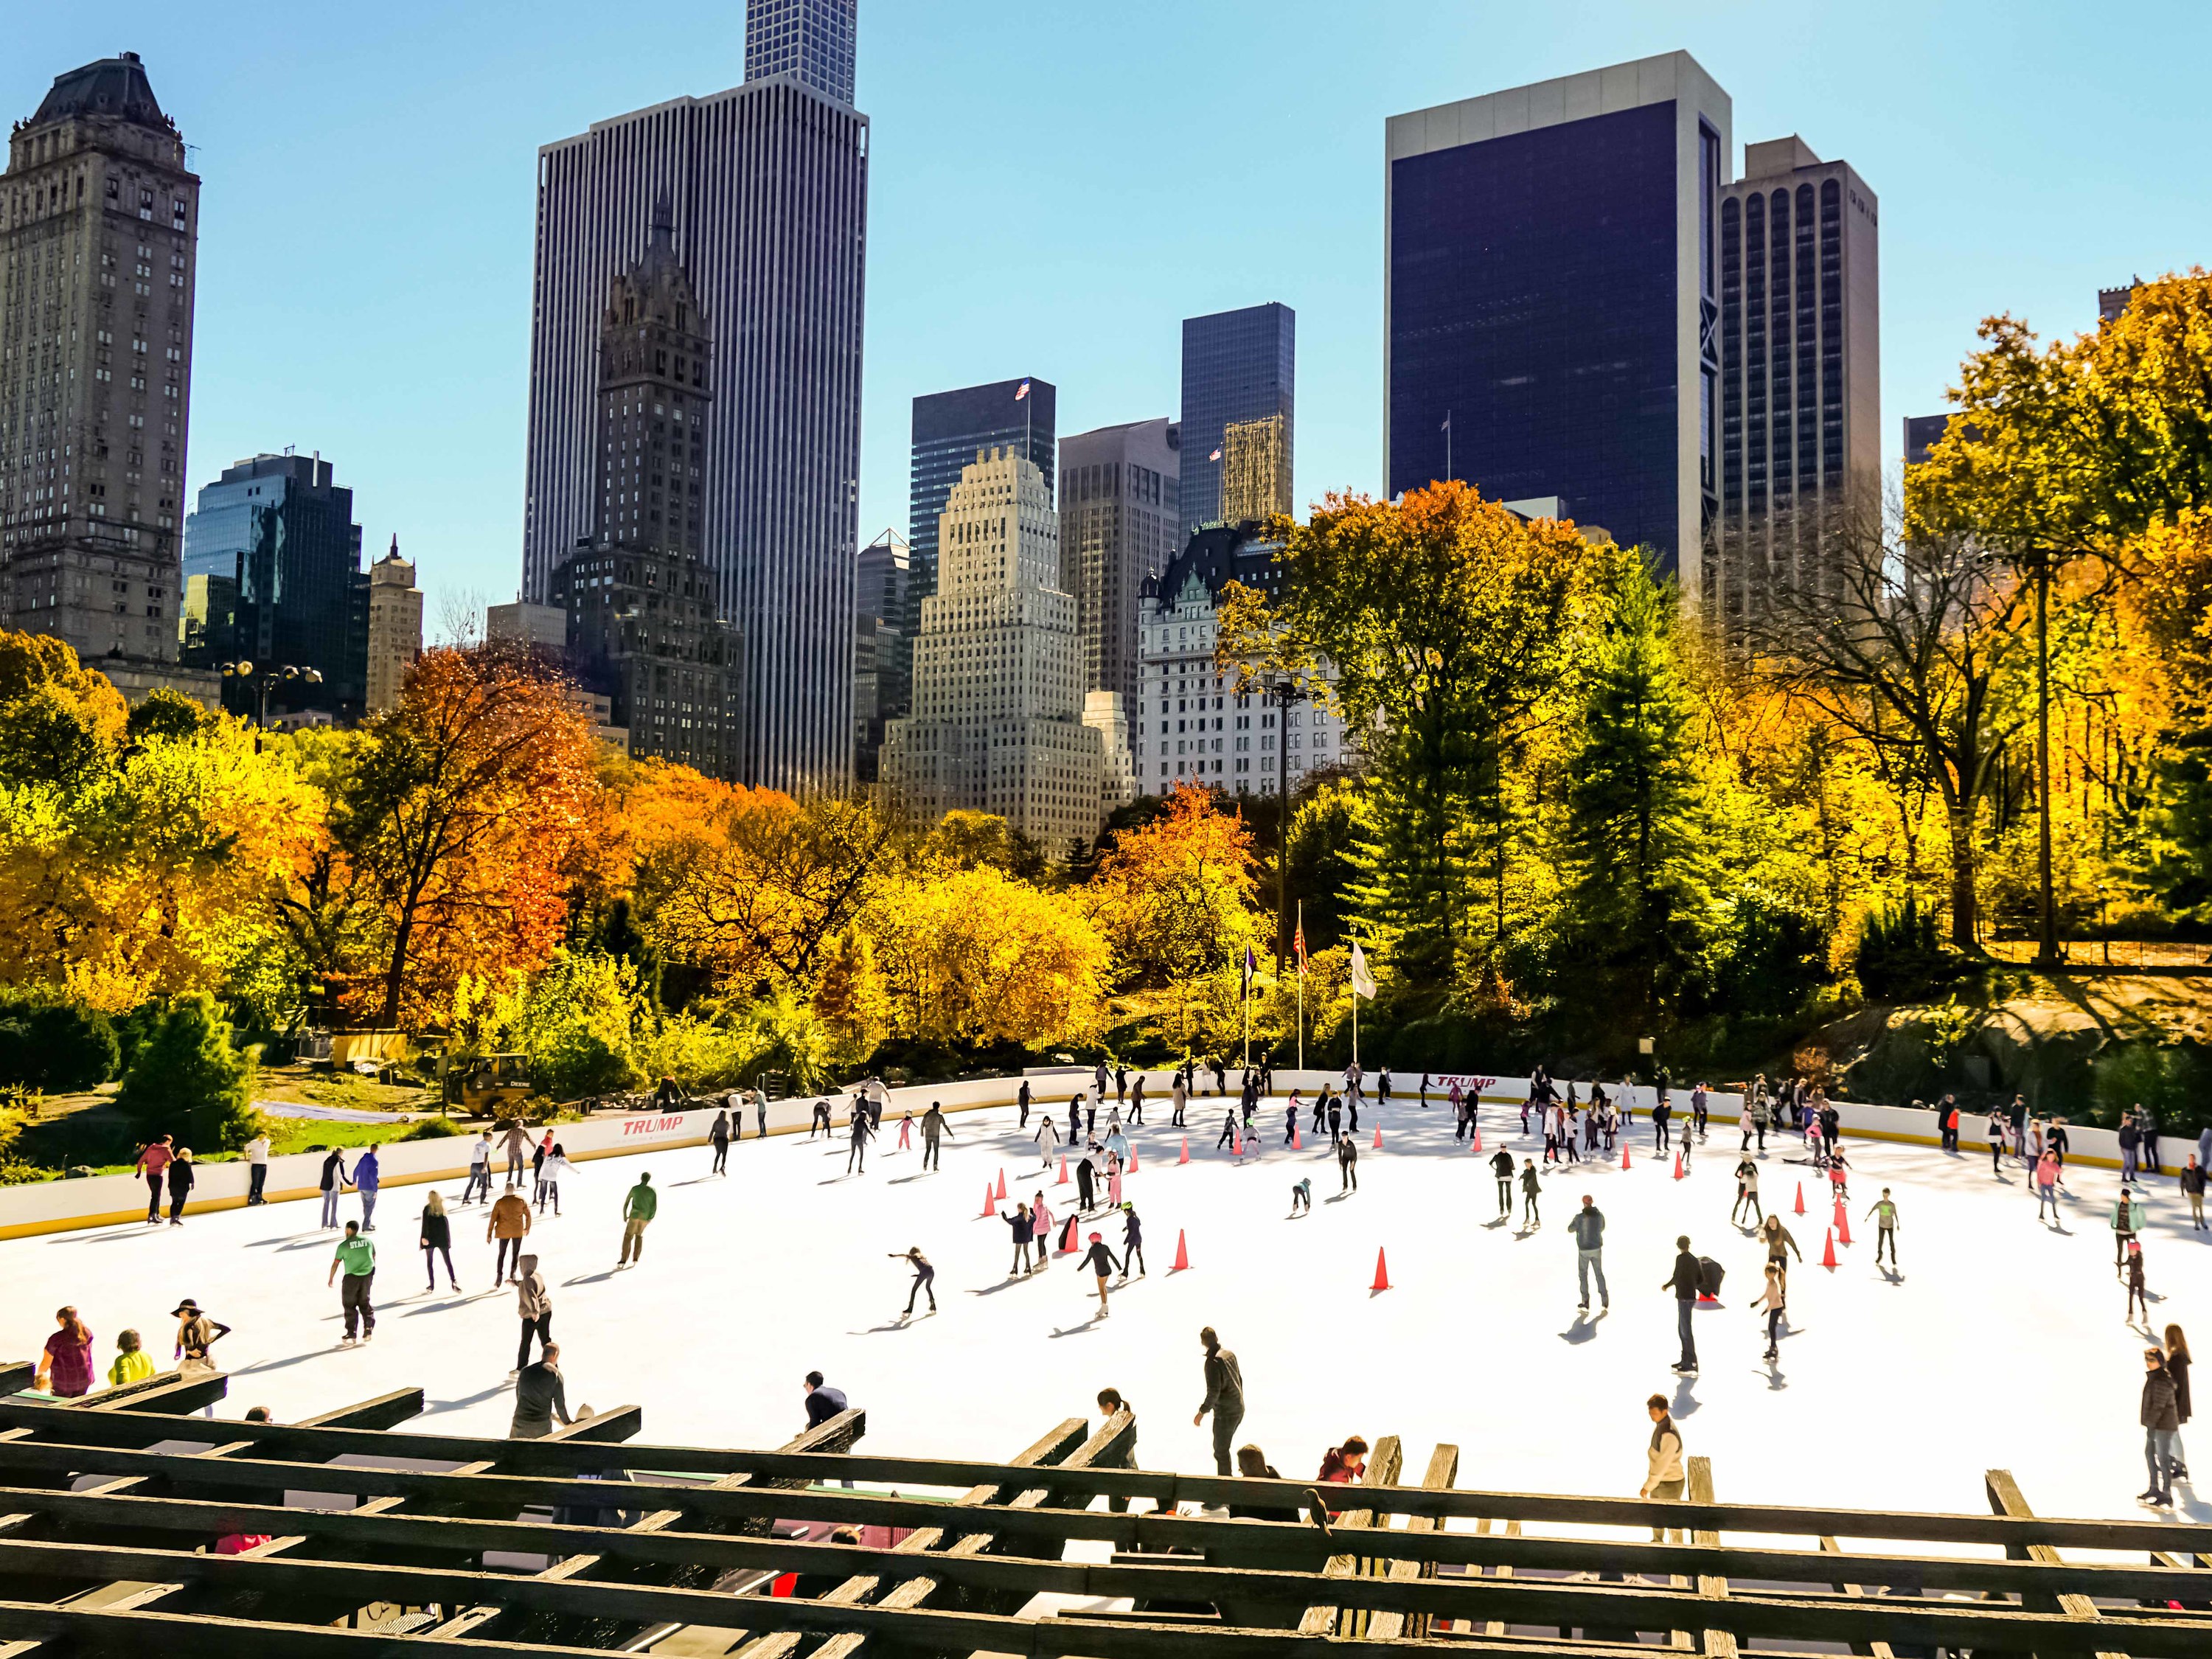 Ice skating in Central Park is officially one of America's most cherished Thanksgiving traditions